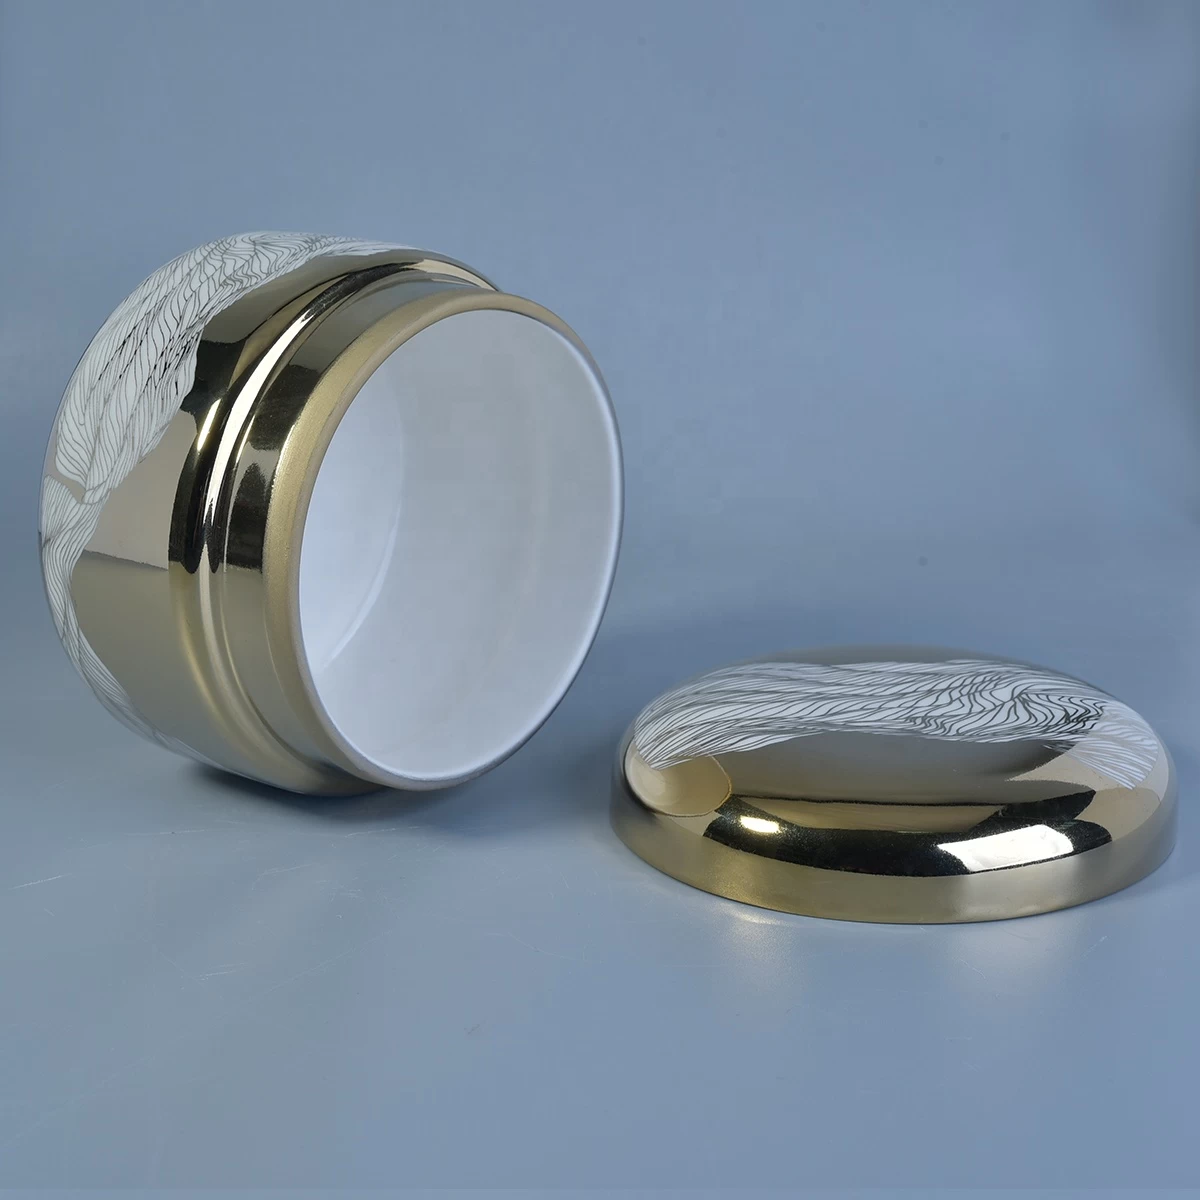 Sunny new design gold scented ceramic candle holders with lids